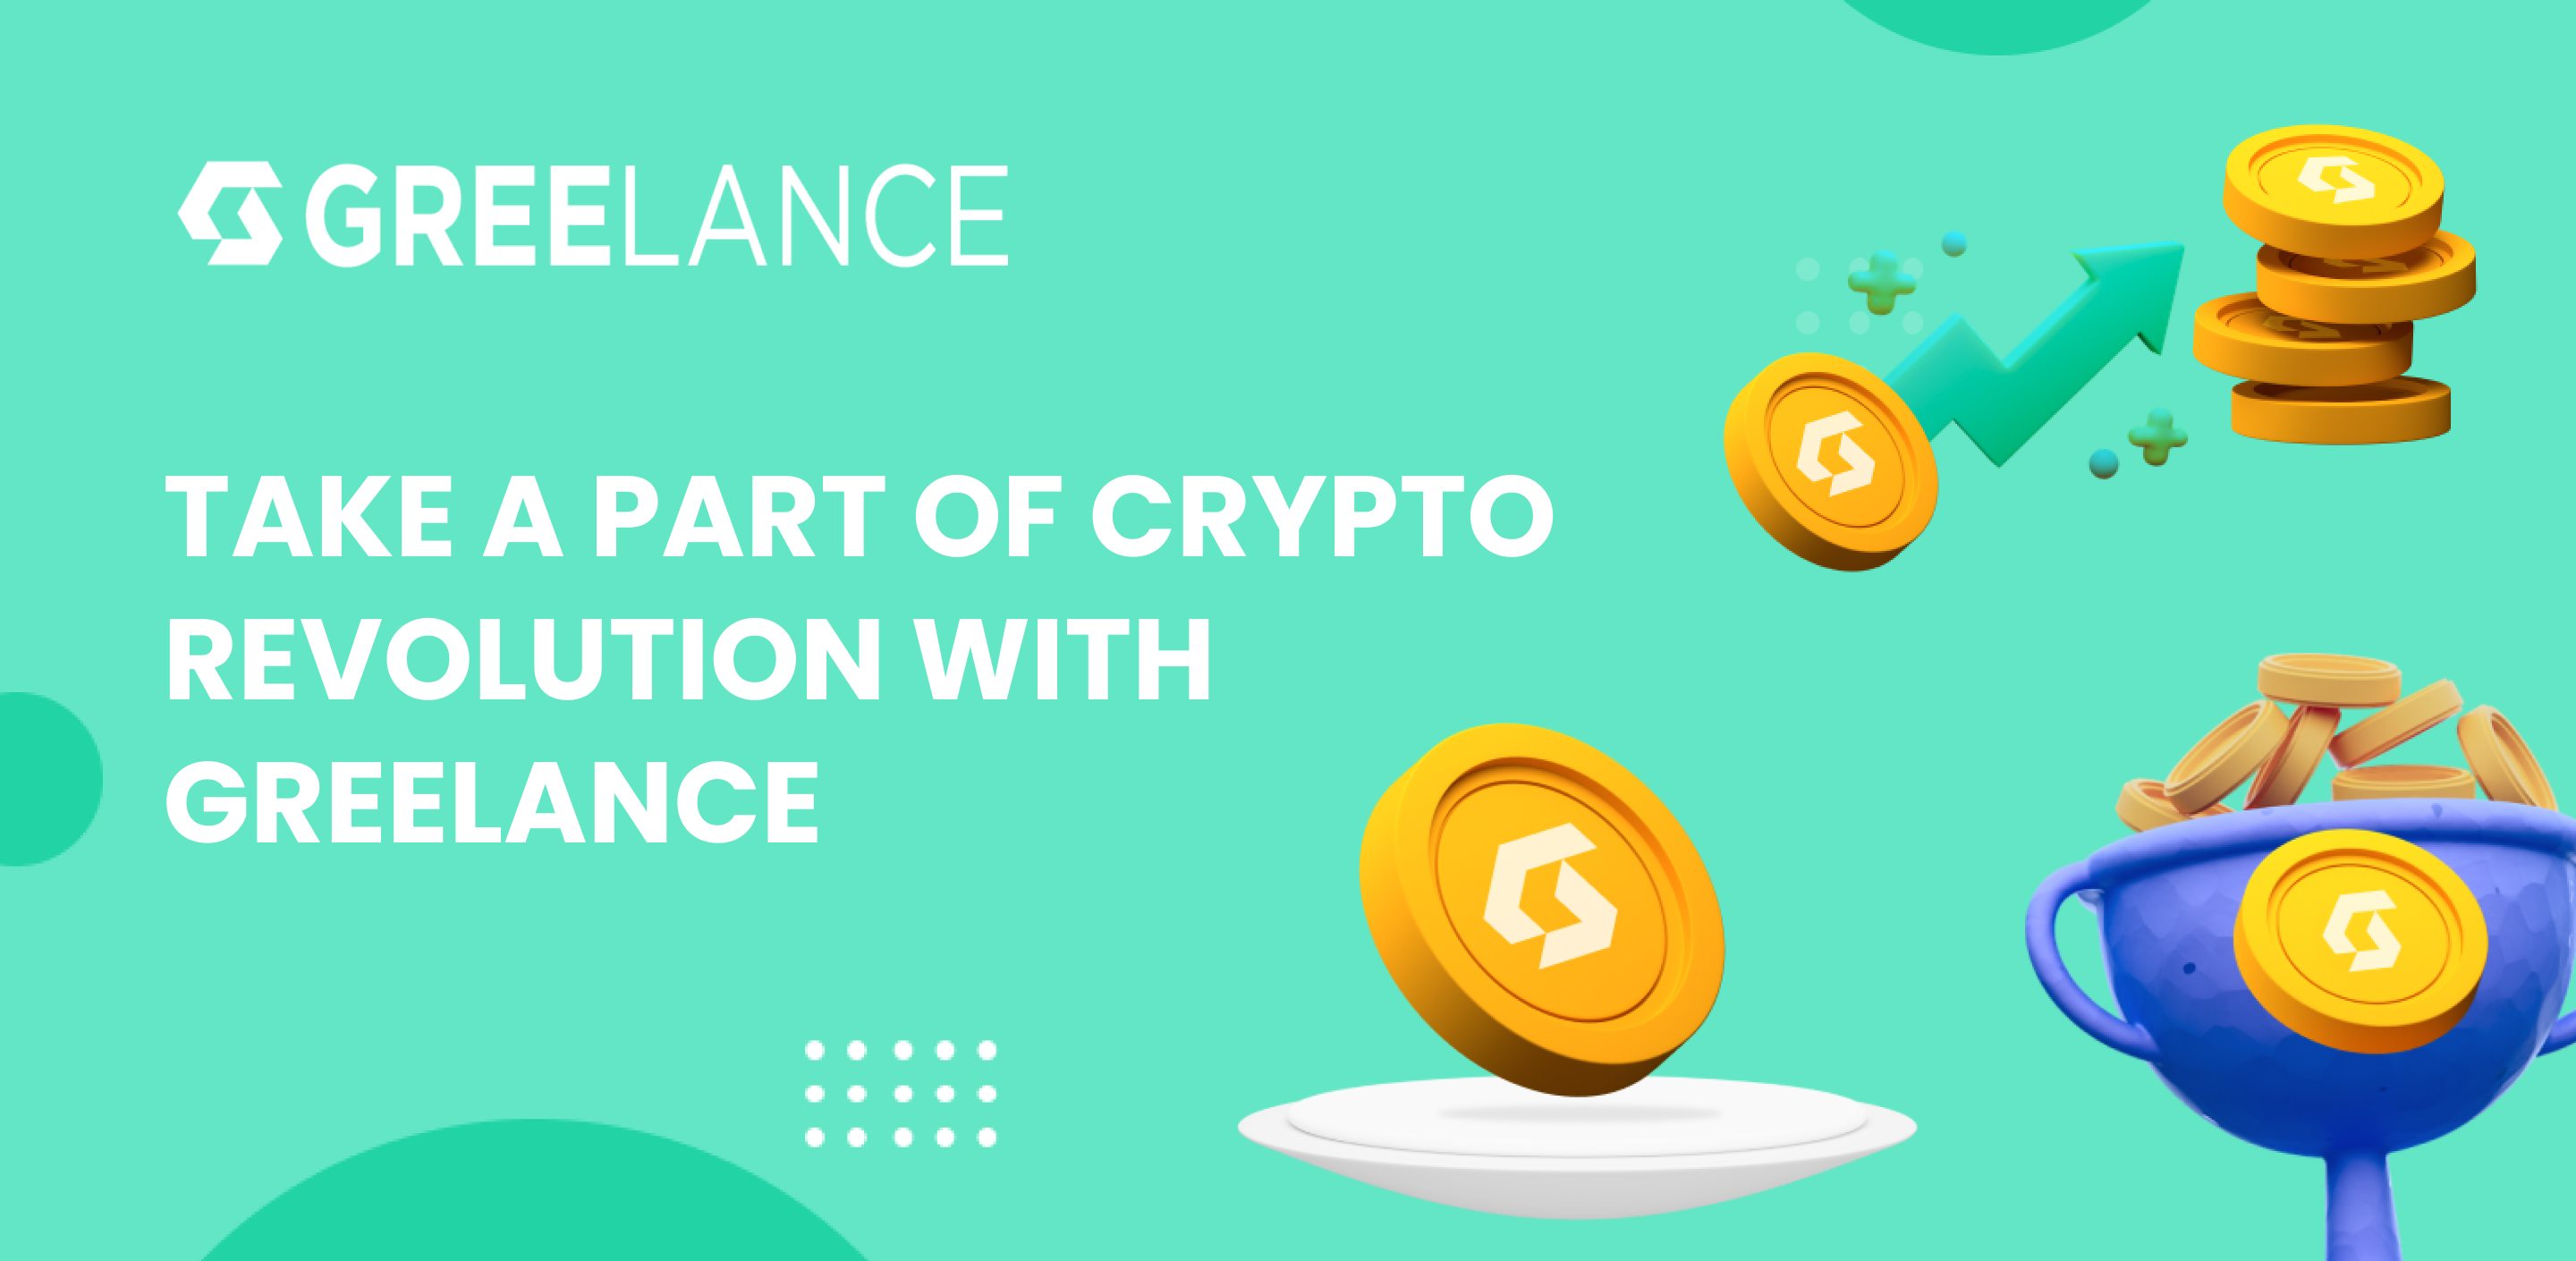 Take a part of crypto revolution with Greelance